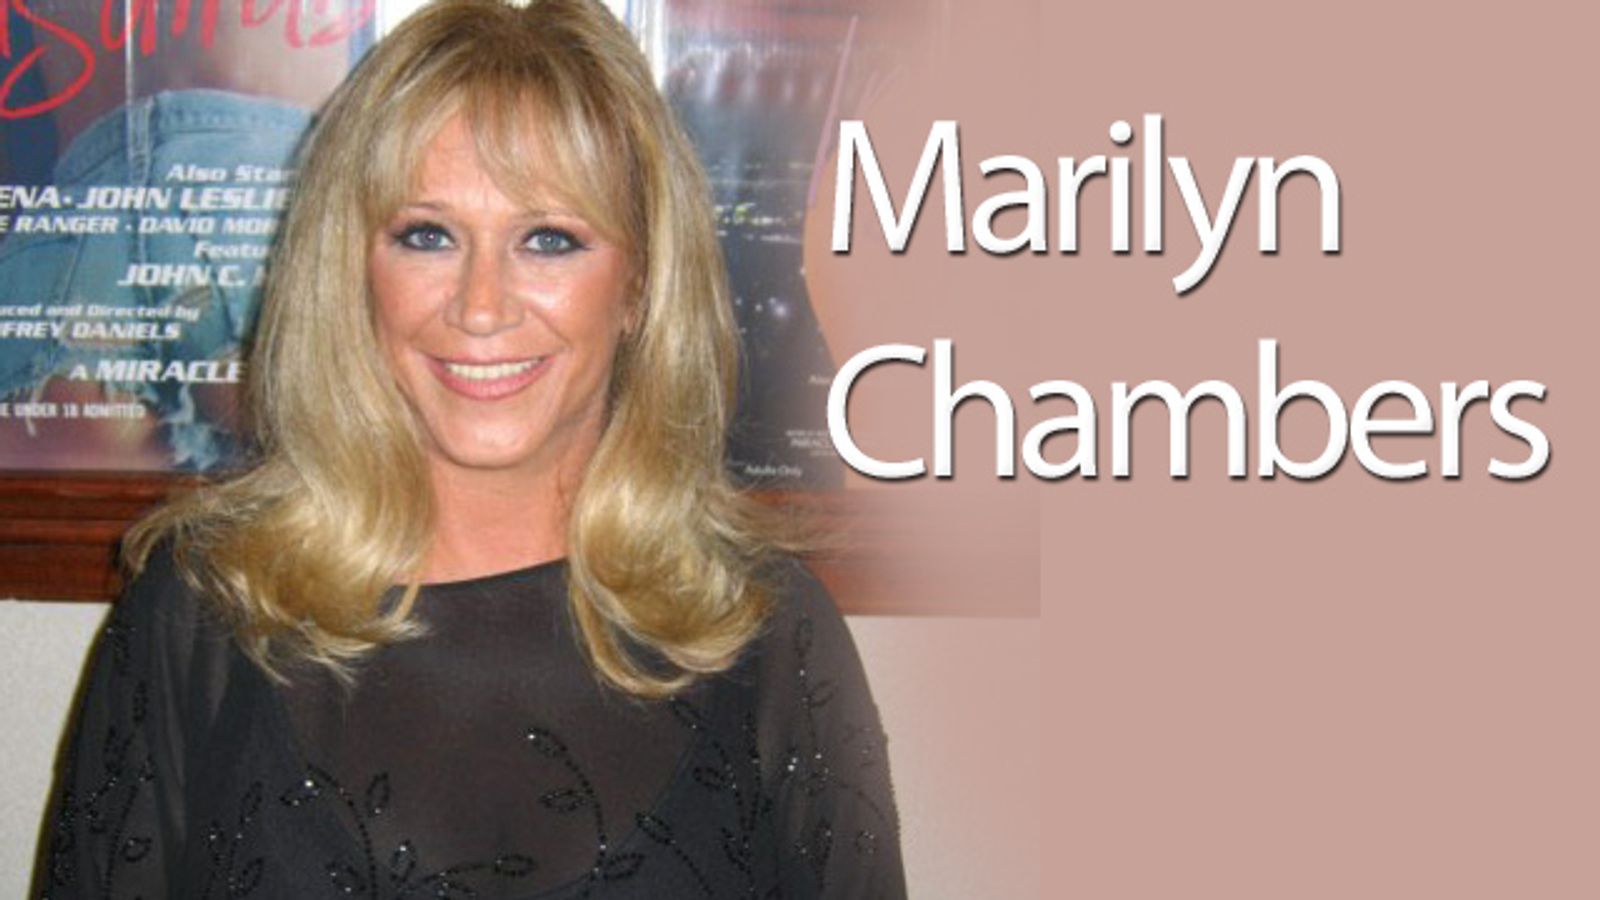 Marilyn Chambers Autopsy So Far Inconclusive